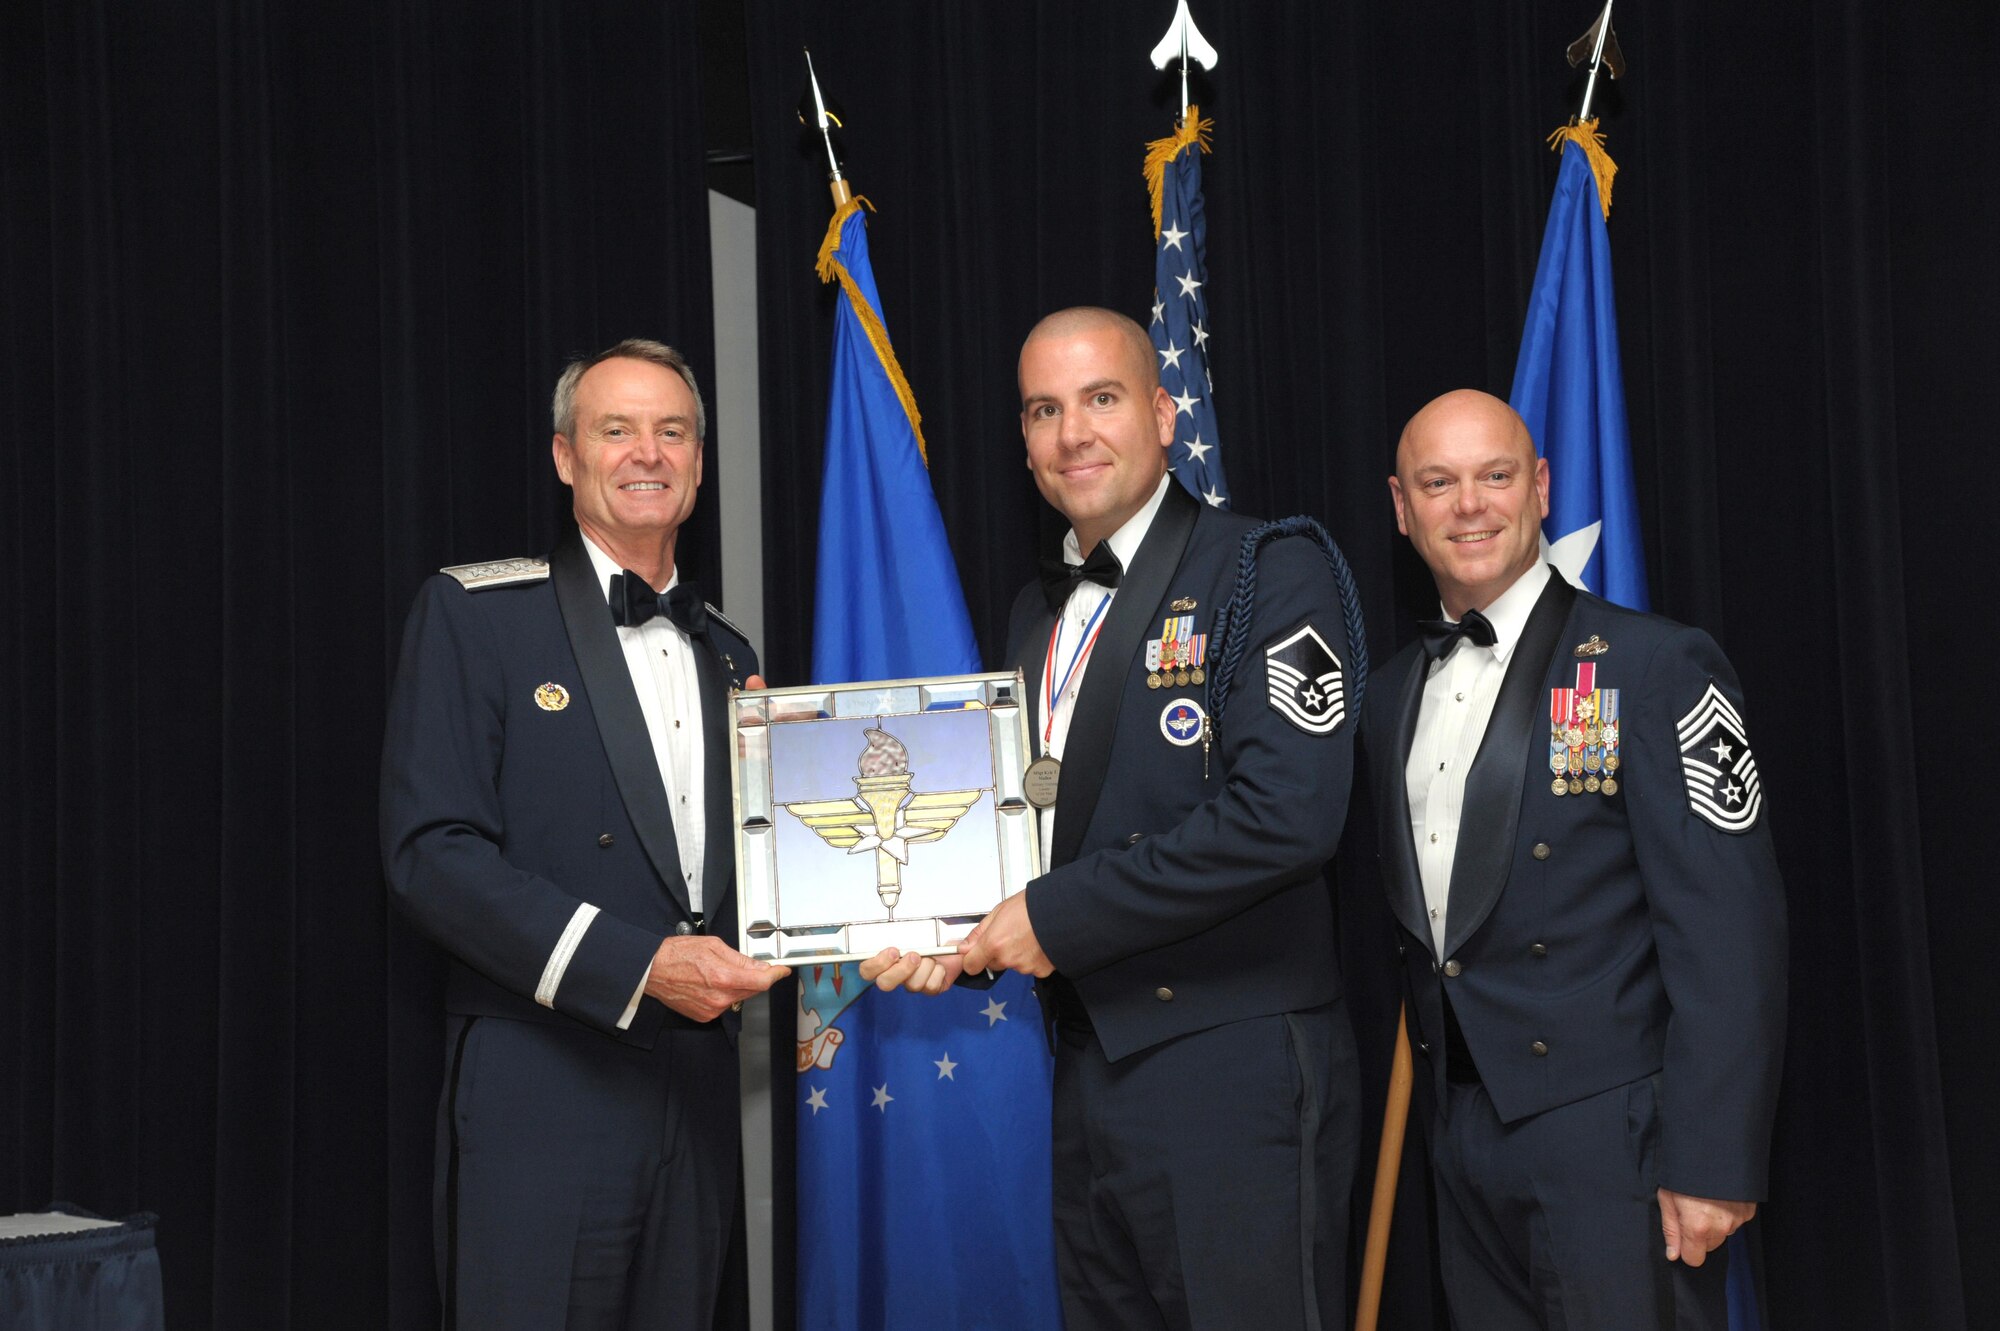 Tech. Sgt. Kyle Mullen, Technical Training Operations Center, Keesler Air Force Base, Mississippi, receives an award from Lt. Gen. Darryl Roberson, commander, Air Education and Training Command and AETC Command Chief Master Sgt. David Staton during a ceremony here, June 16. Mullen was selected as the AETC Military Training Leader of the Year. (U.S. Air Force photo by Joel Martinez)